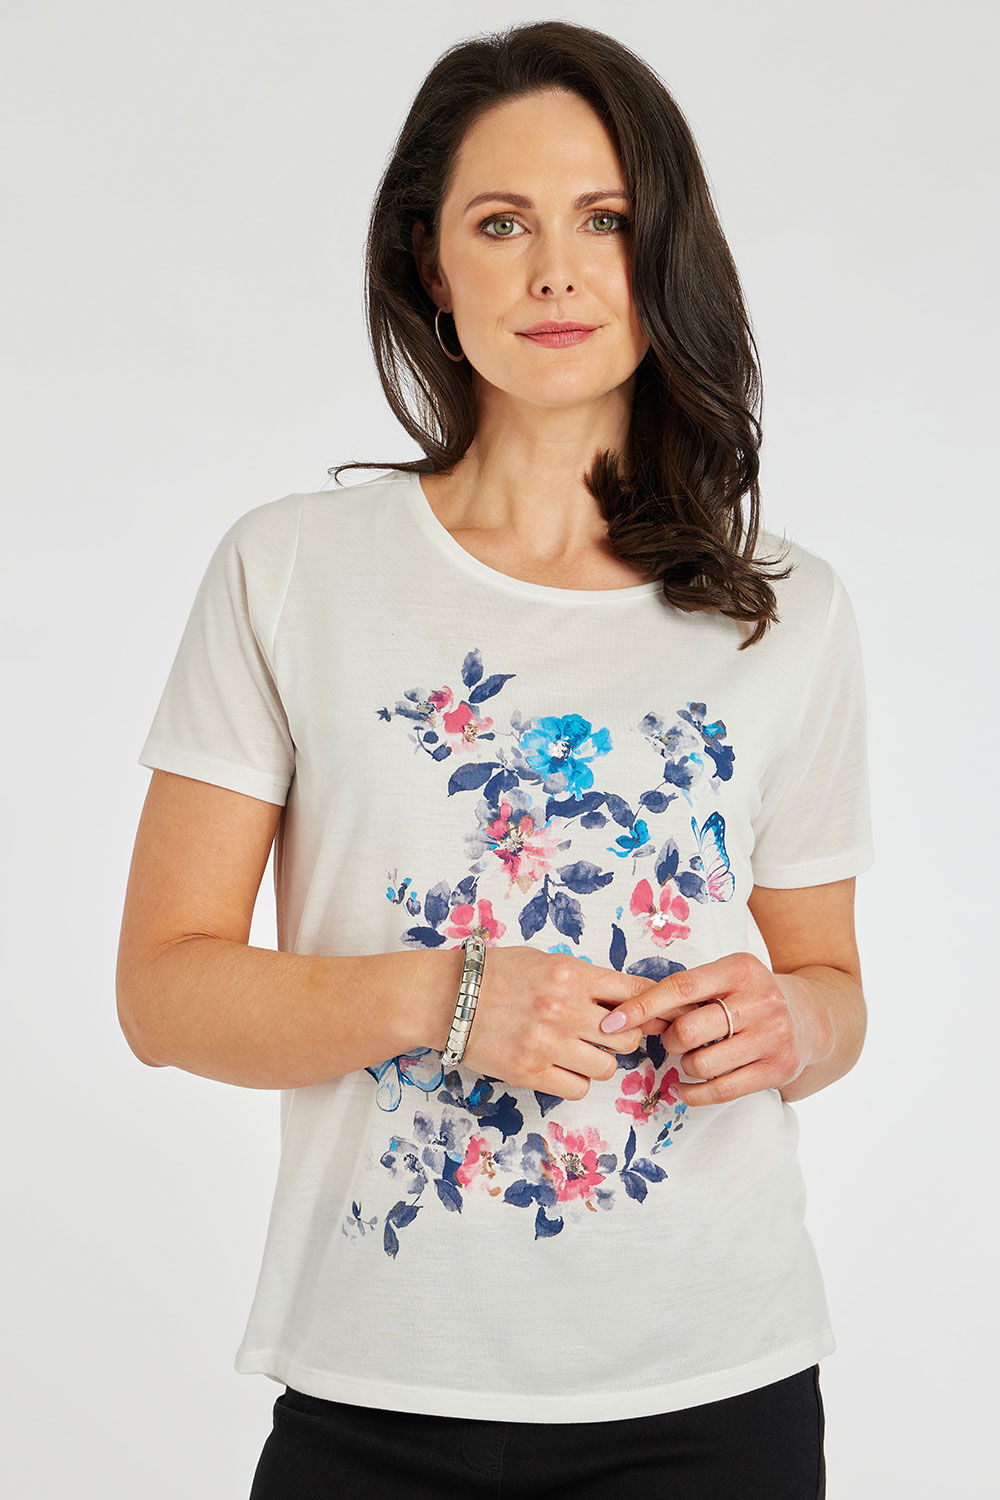 Bonmarche Ivory Short Sleeve Floral Butterfly Print T-Shirt, Size: 18